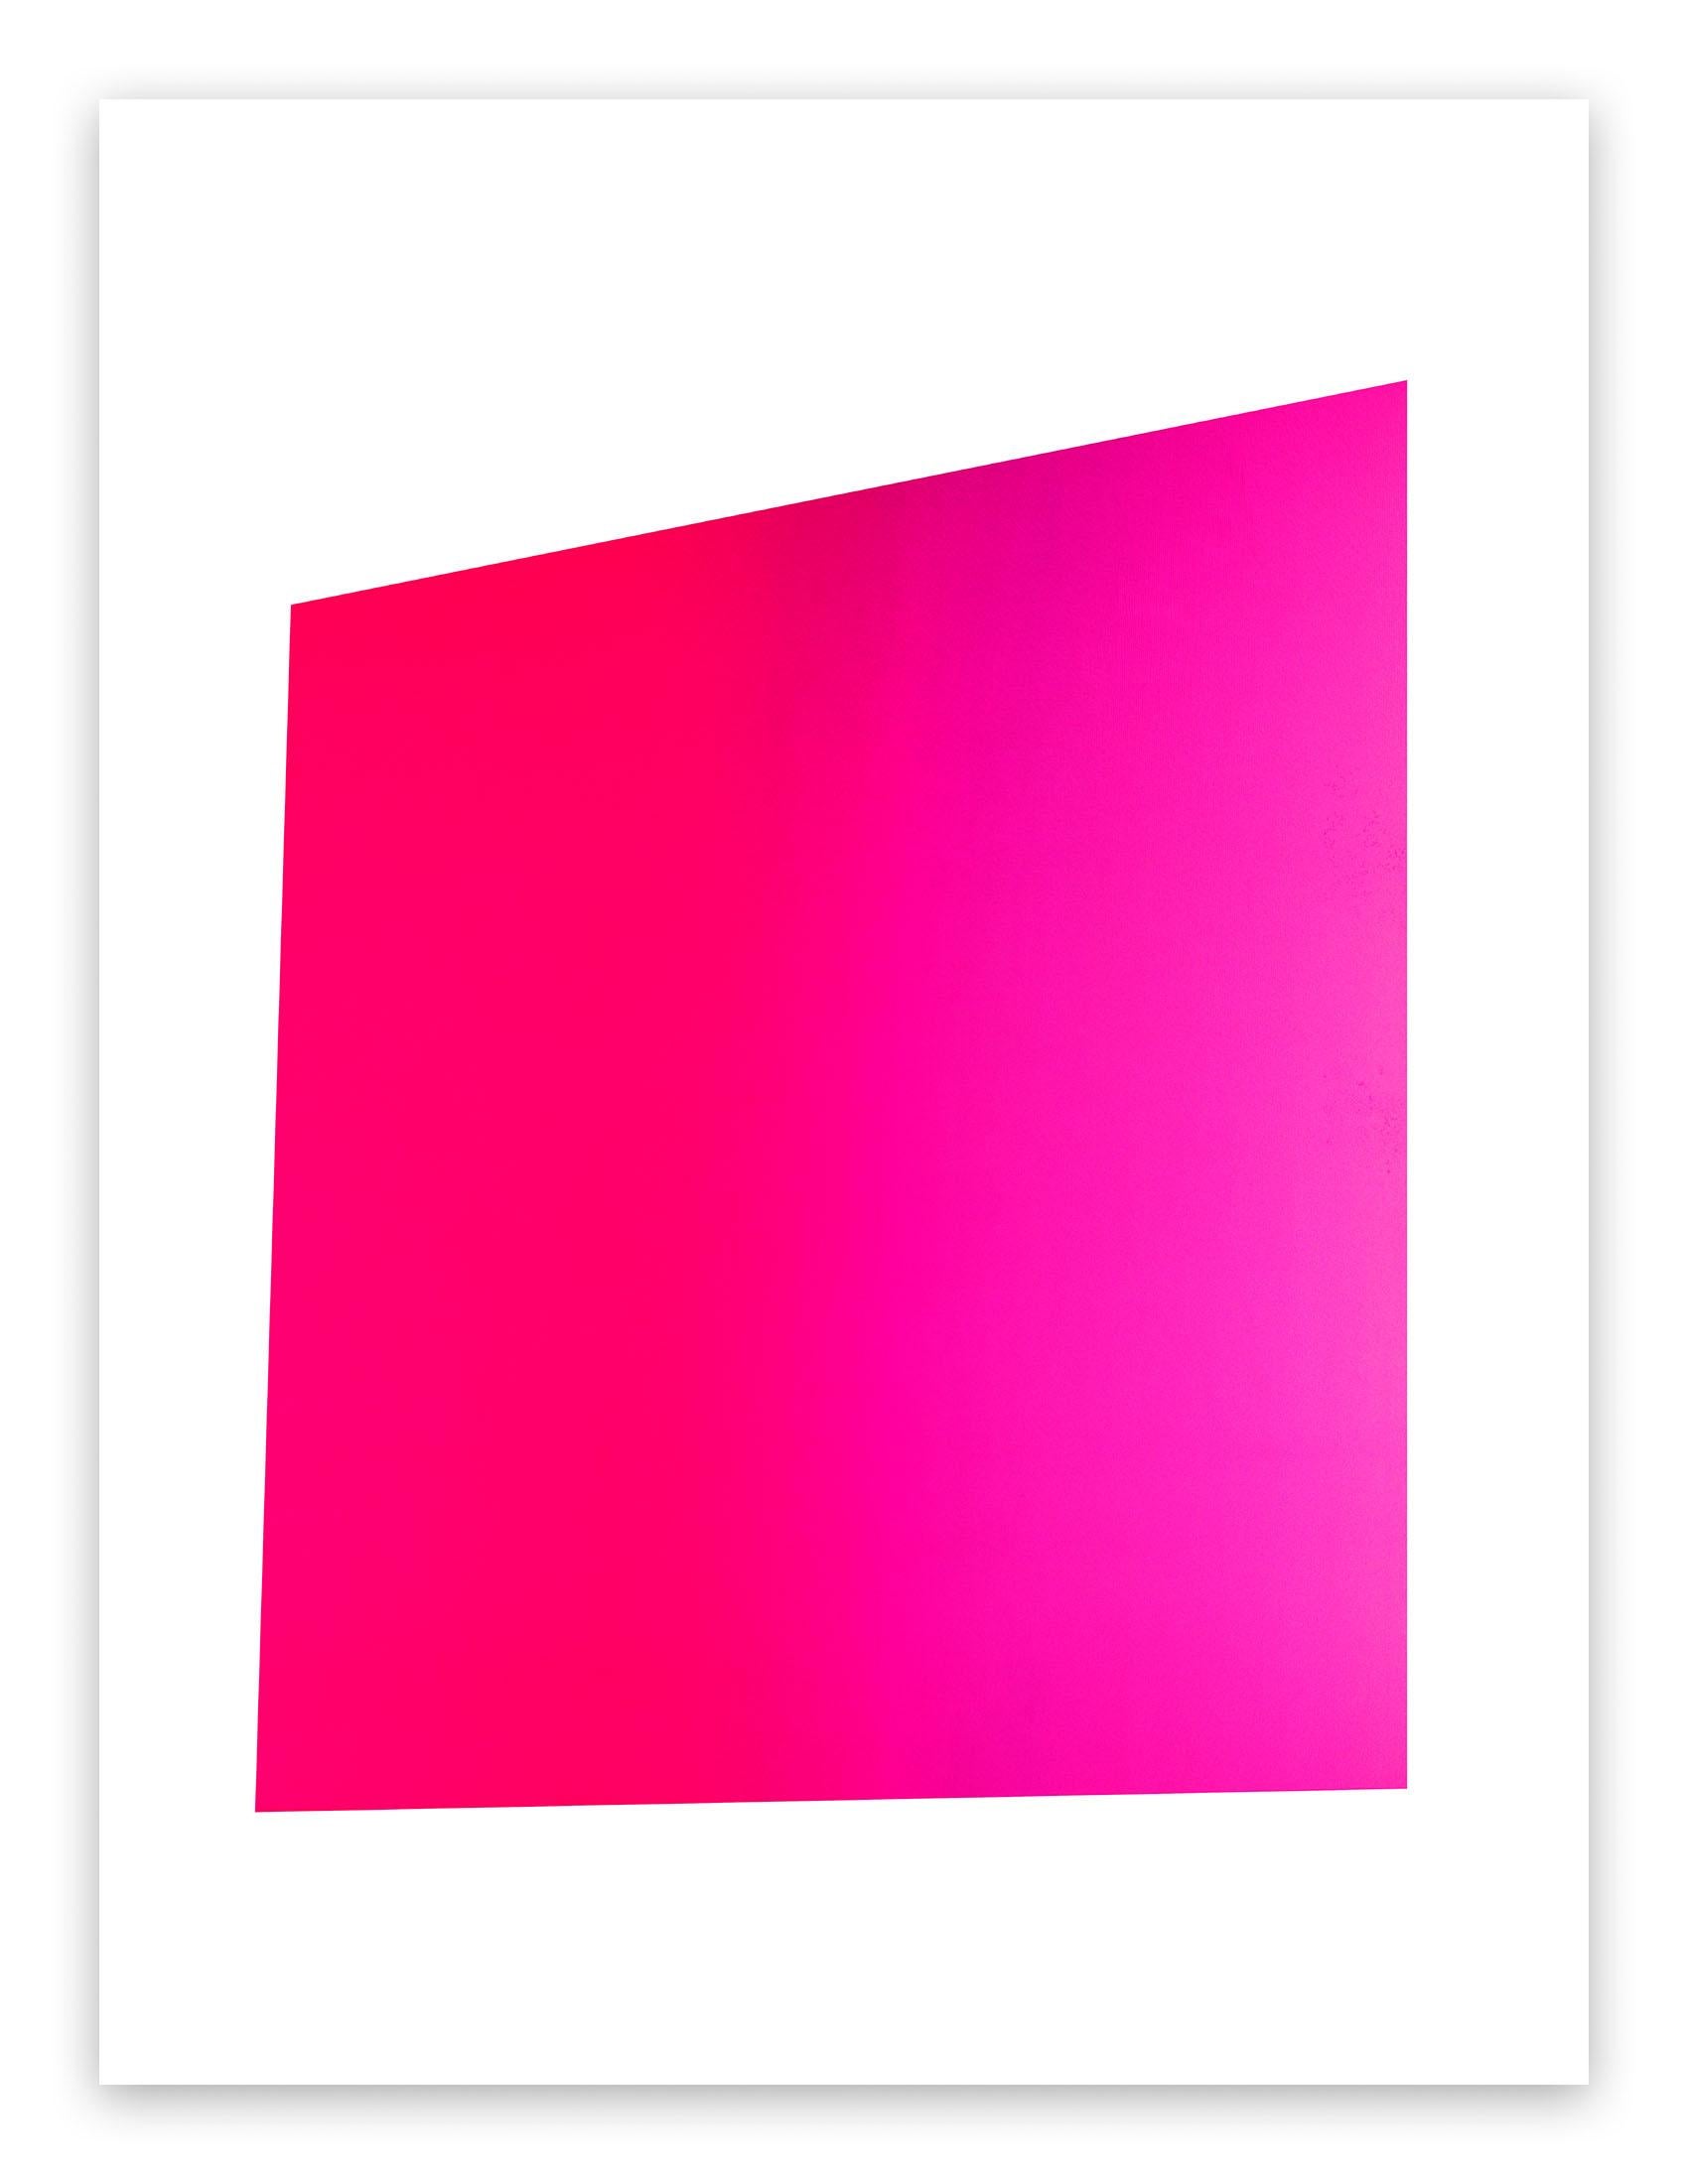 Color Kinesthesia 6A4221 Pink (Abstract Photography) 

Photographic C Prints, printed on Canson Platinè fiber Rag 310g - Unframed

"Edition of 3 + 2Ap  Turnaround time 2-3 weeks, printed on demand.

This artwork will be shipped rolled in a